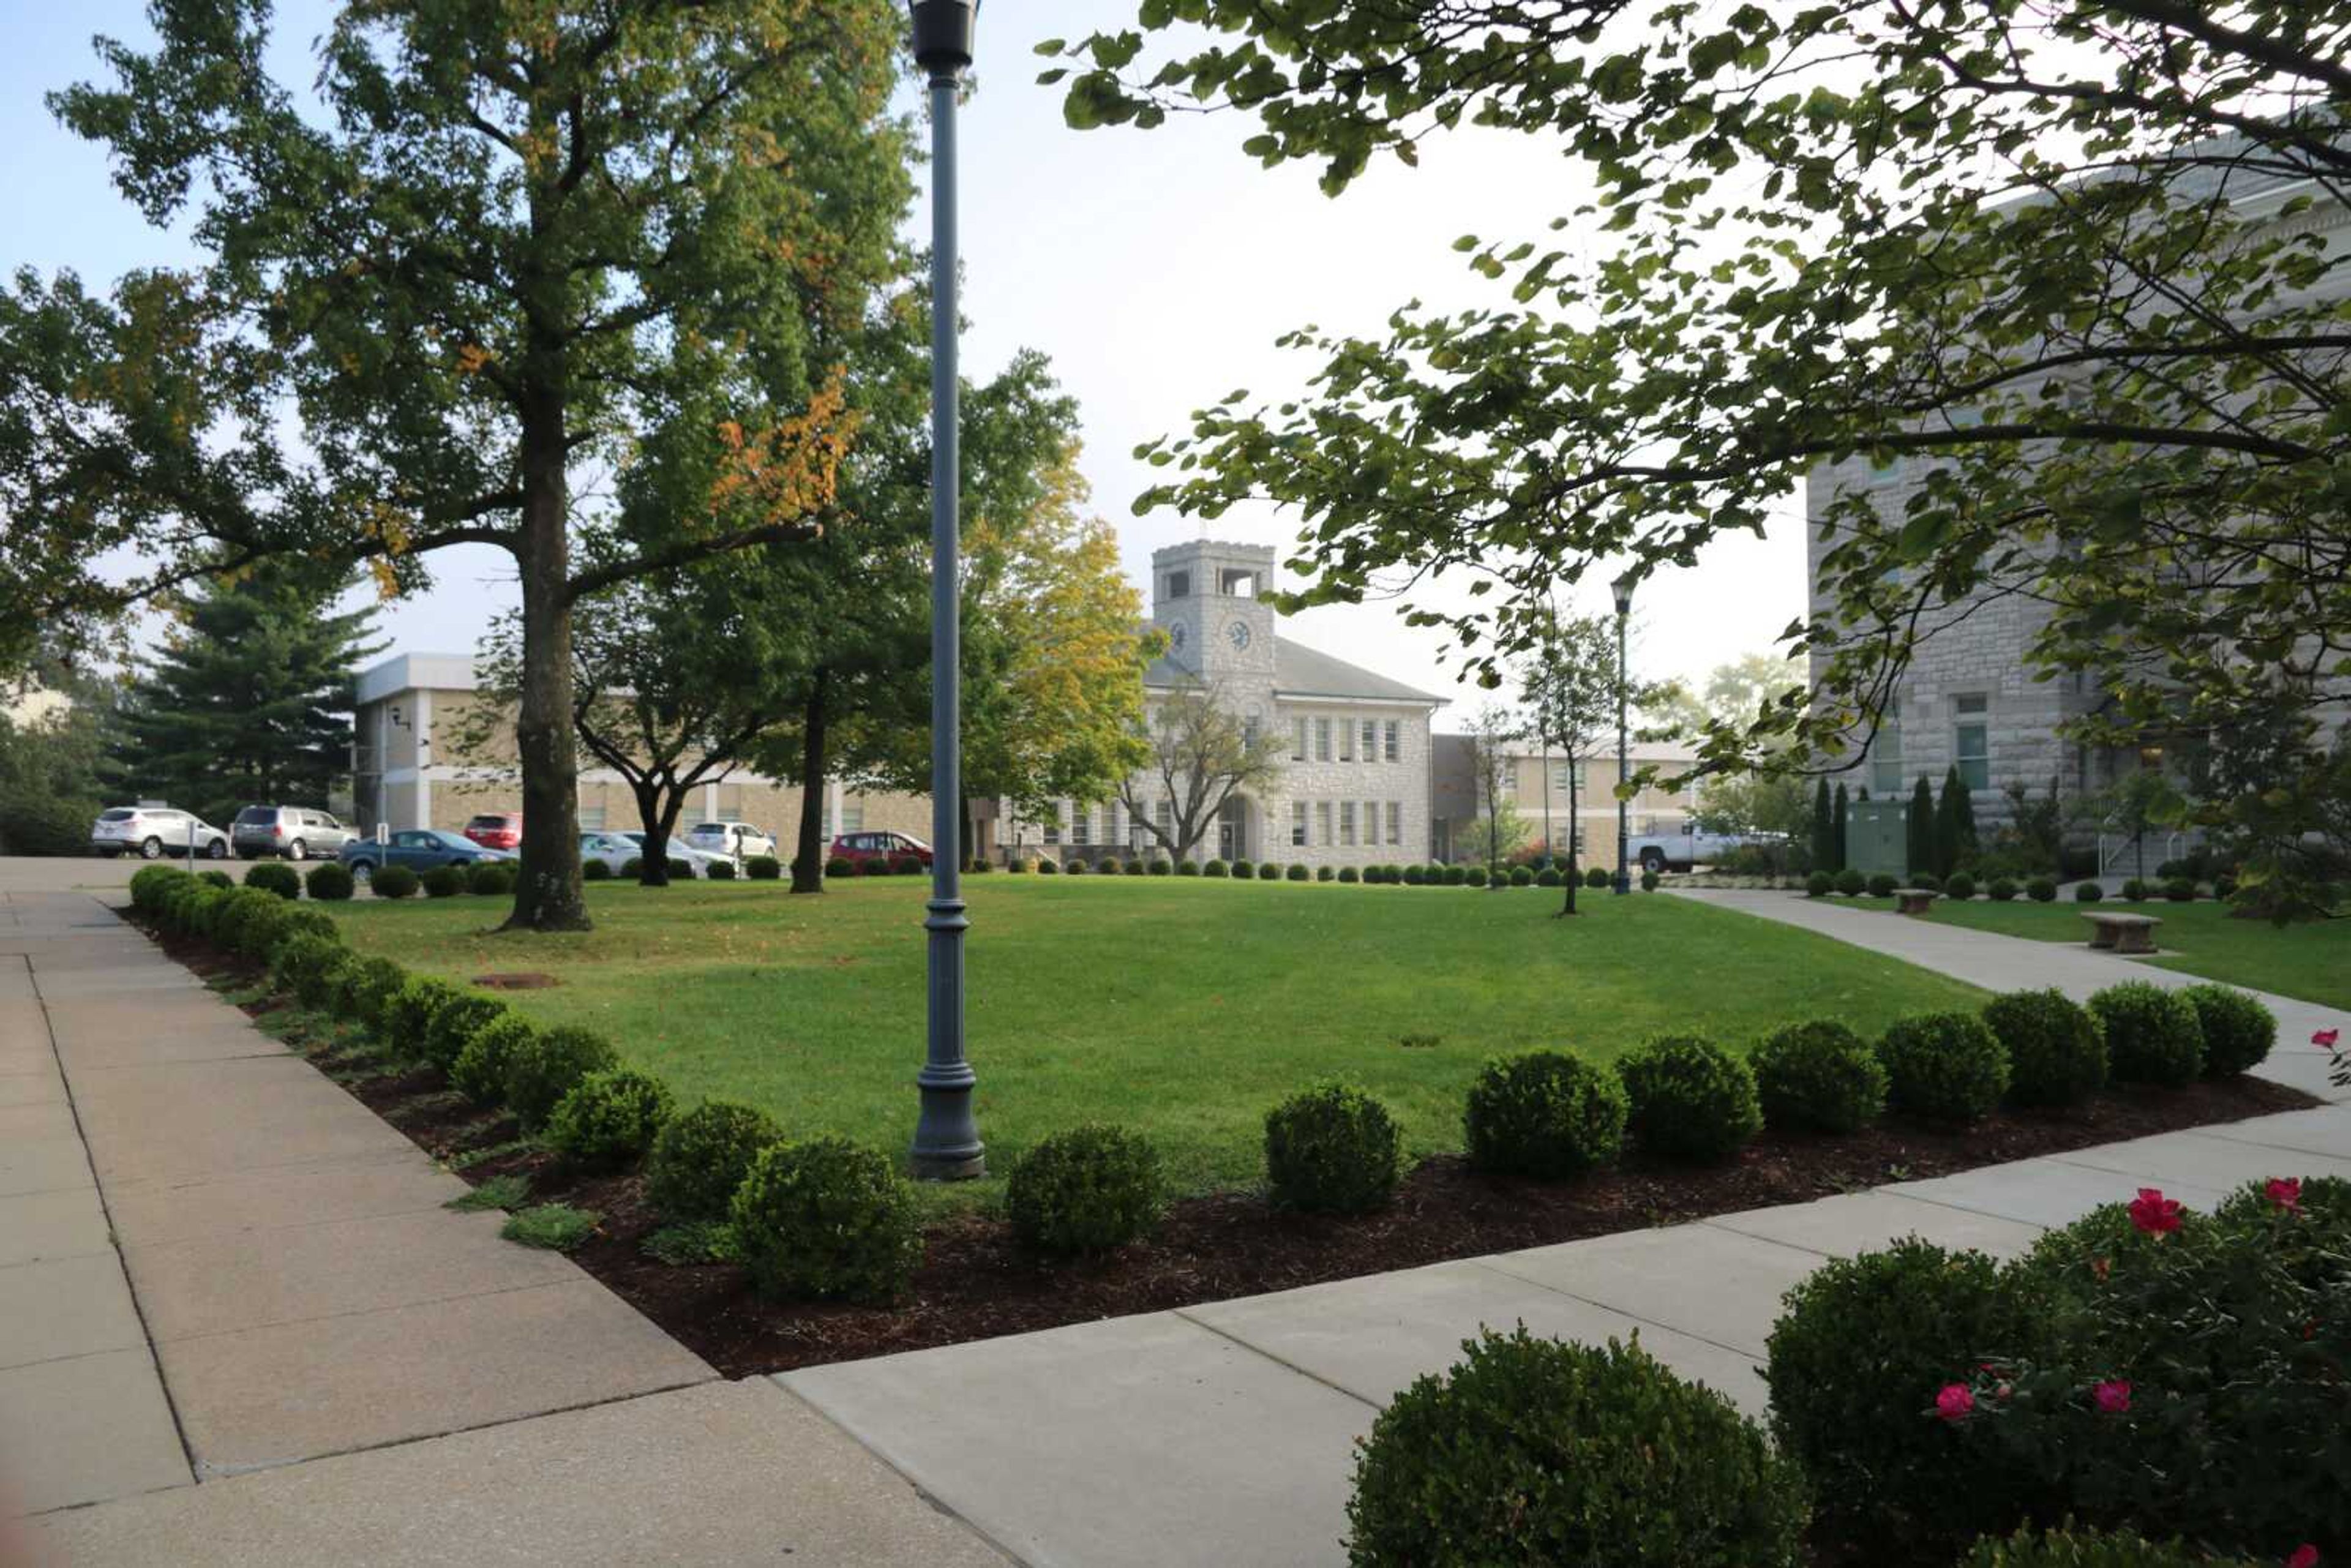 The green space between Academic Hall and Memorial Hall will be home to the Veterans Plaza.